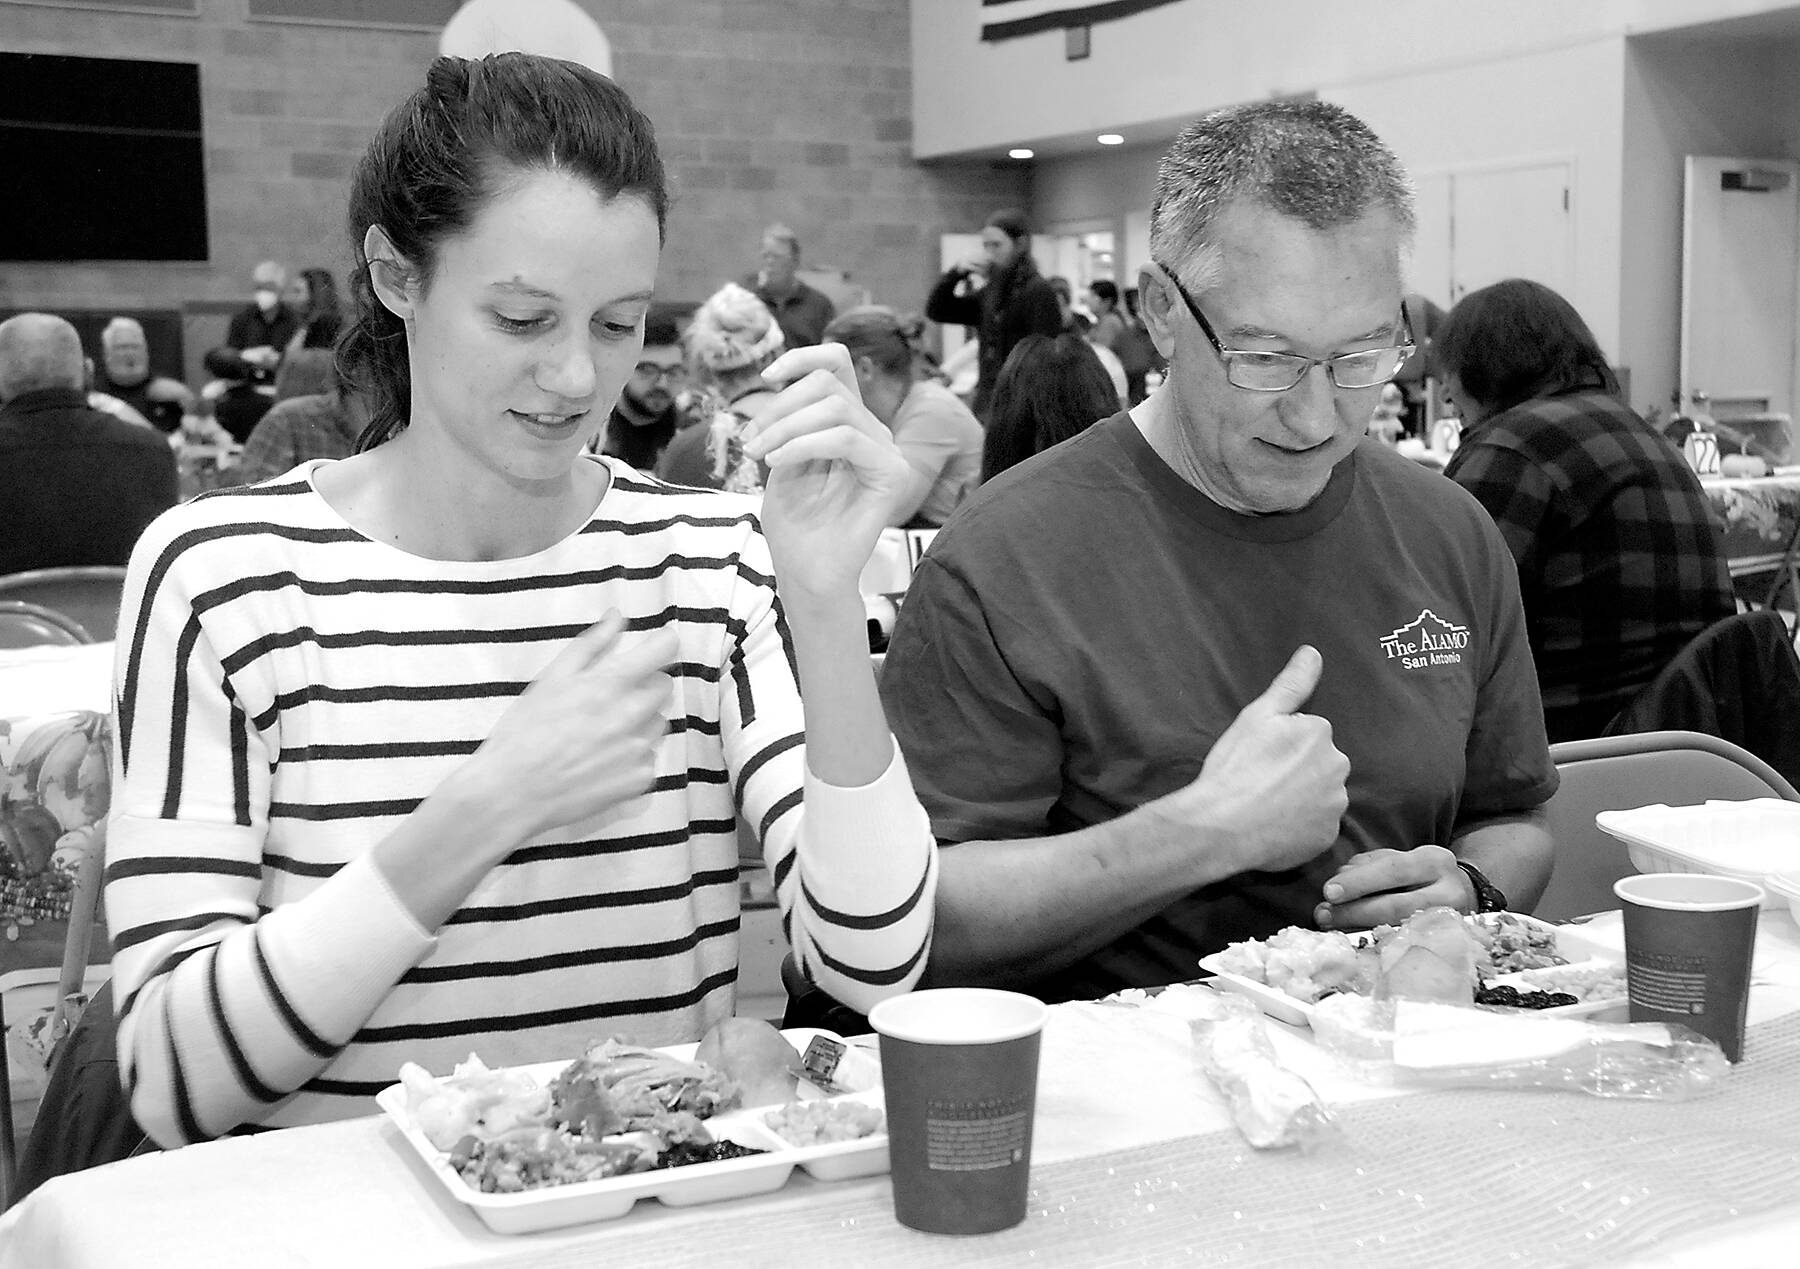 KEITH THORPE/PENINSULA DAILY NEWS
Cecilia Stevenson, of Dallas, left, and her father, Will Stevenson of Port Angeles, say a blessing before enjoying a Thanksgiving meal in the fellowship hall of Queen of Angeles Catholic Church in Port Angeles. The church offered a traditional Thanksgiving dinner for the community, with several hundred diners taking advantage of the in-house meal with numerous other dinners sent out for in-home dining.